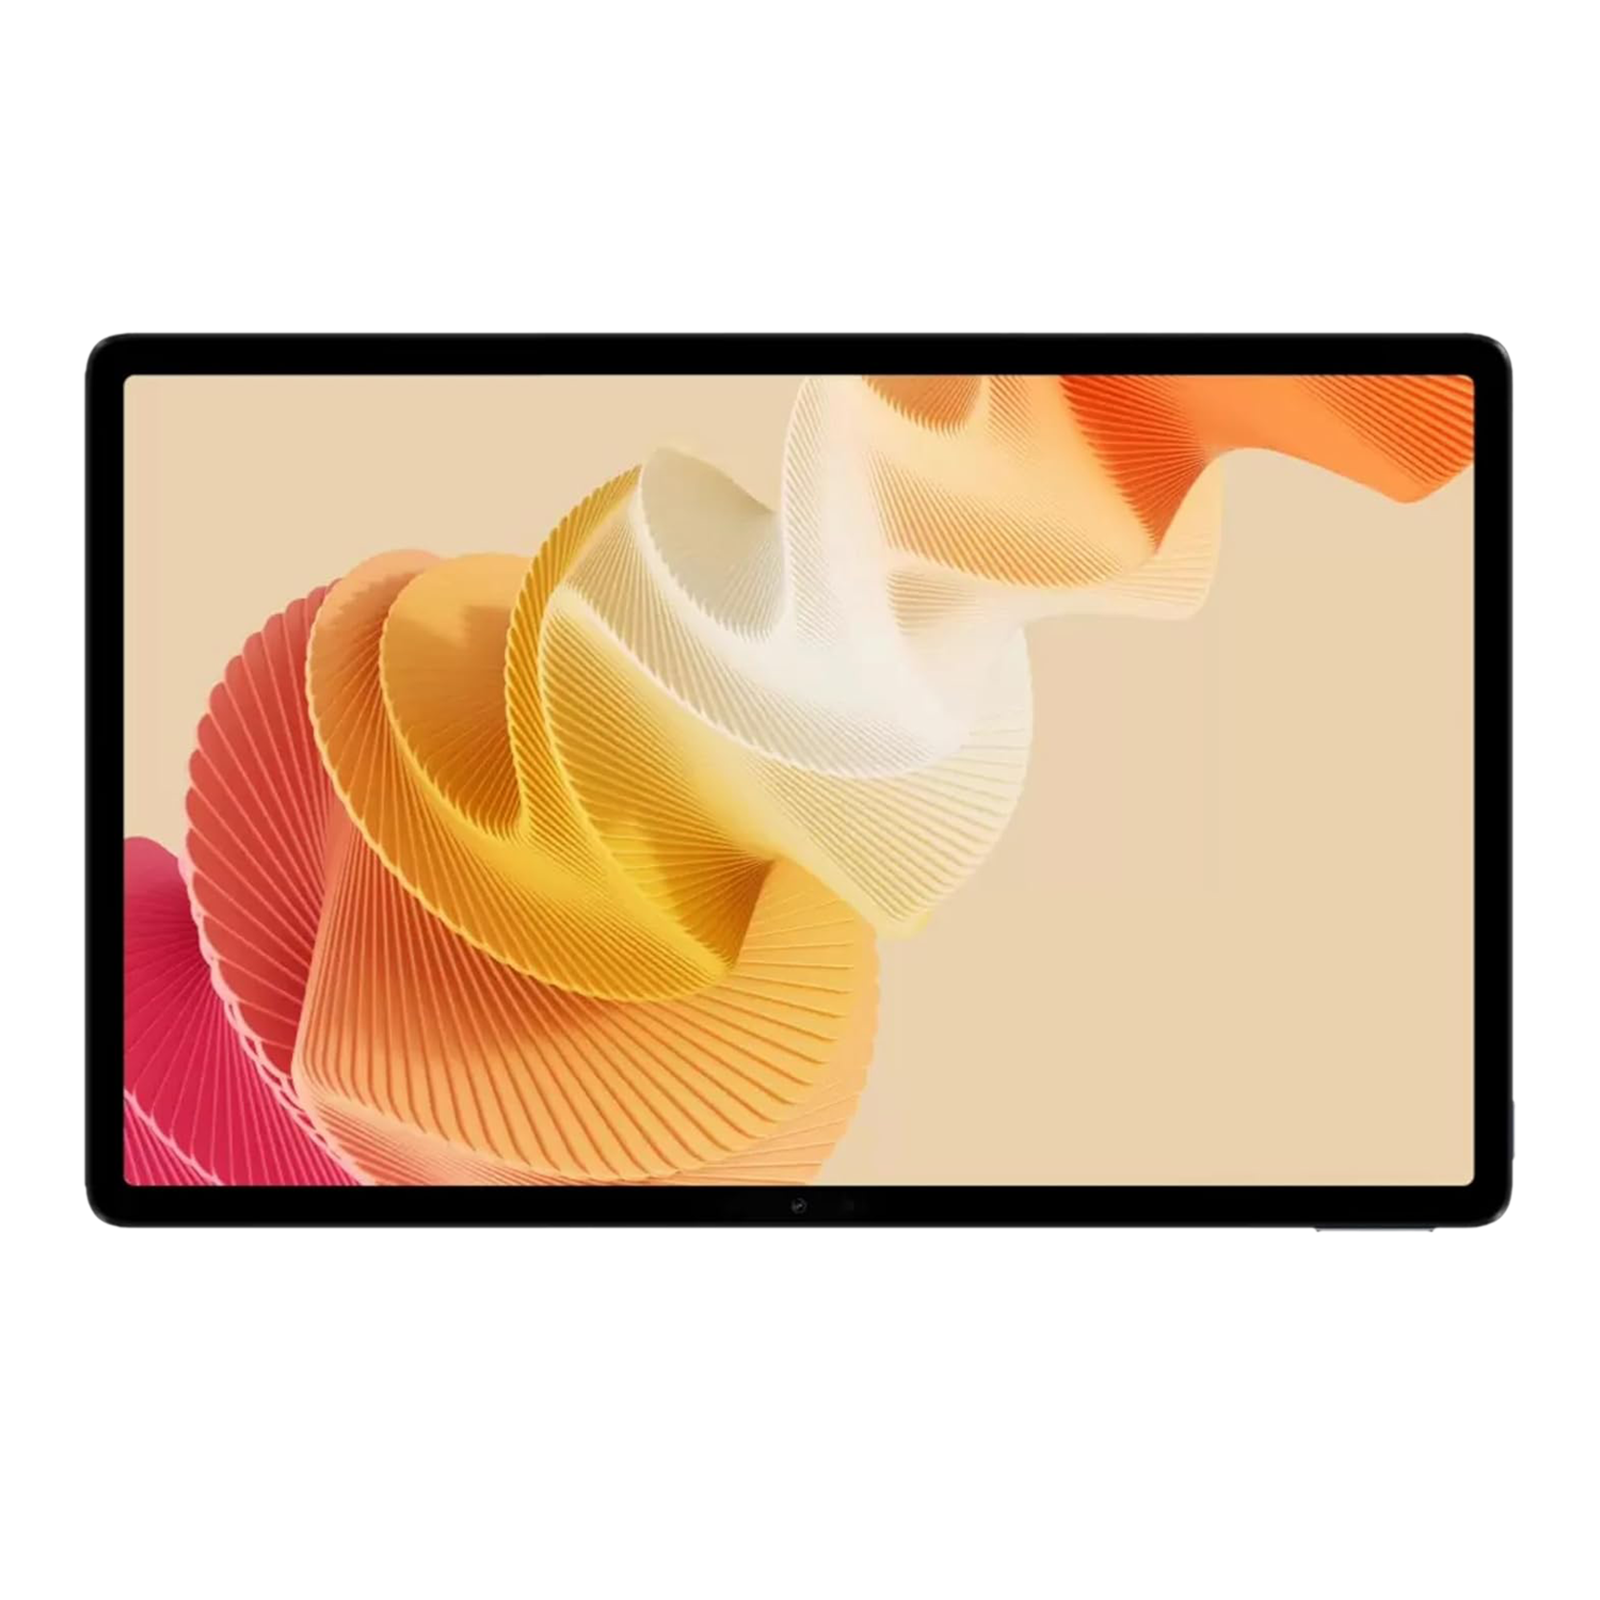 realme Pad 2 Wi-Fi+4G Android Tablet (11.5 Inch, 8GB RAM, 256GB ROM, Imagination Grey)